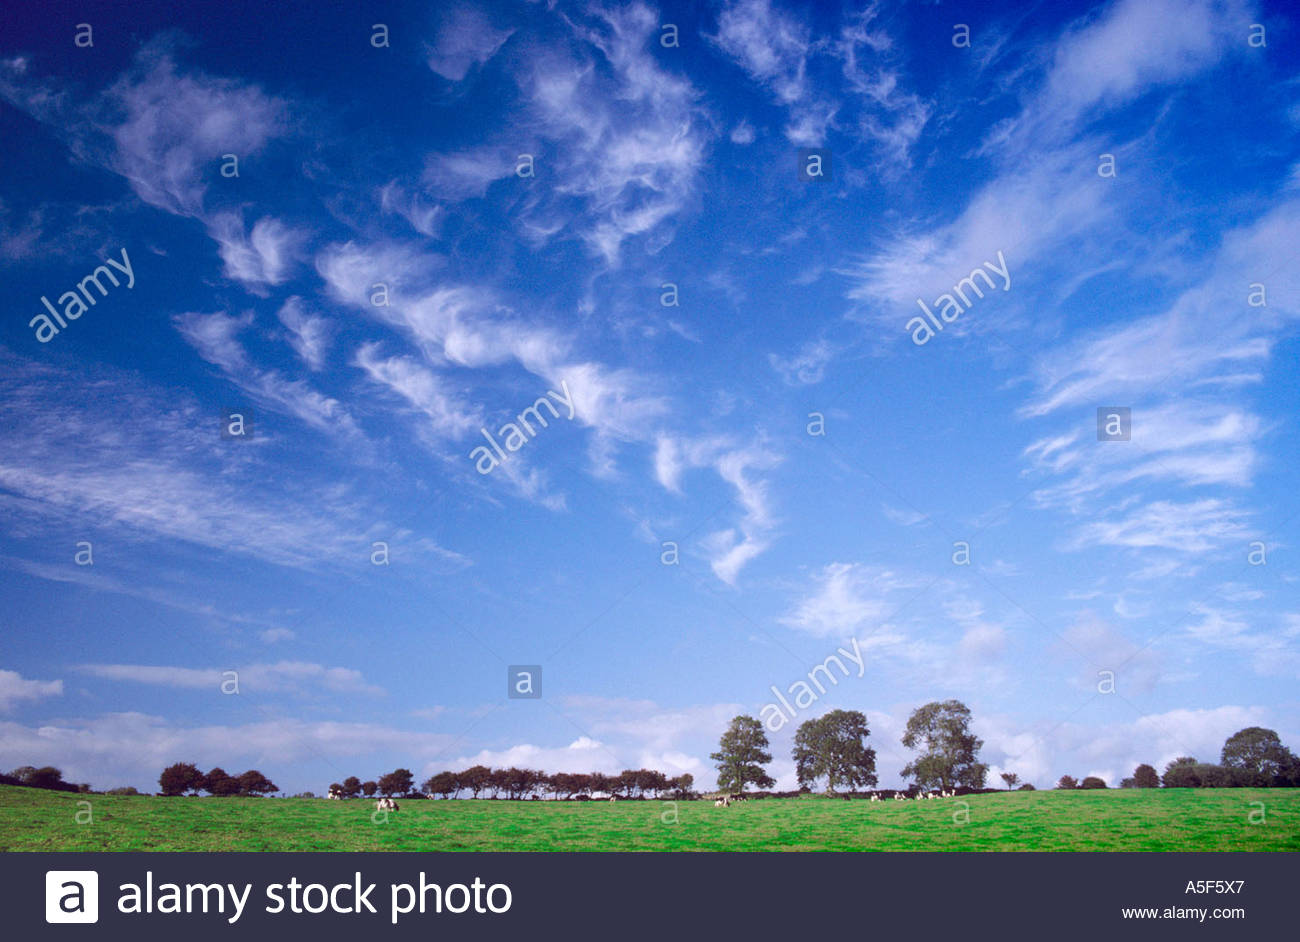 skyscape-of-clouds-and-trees-pembrokeshi